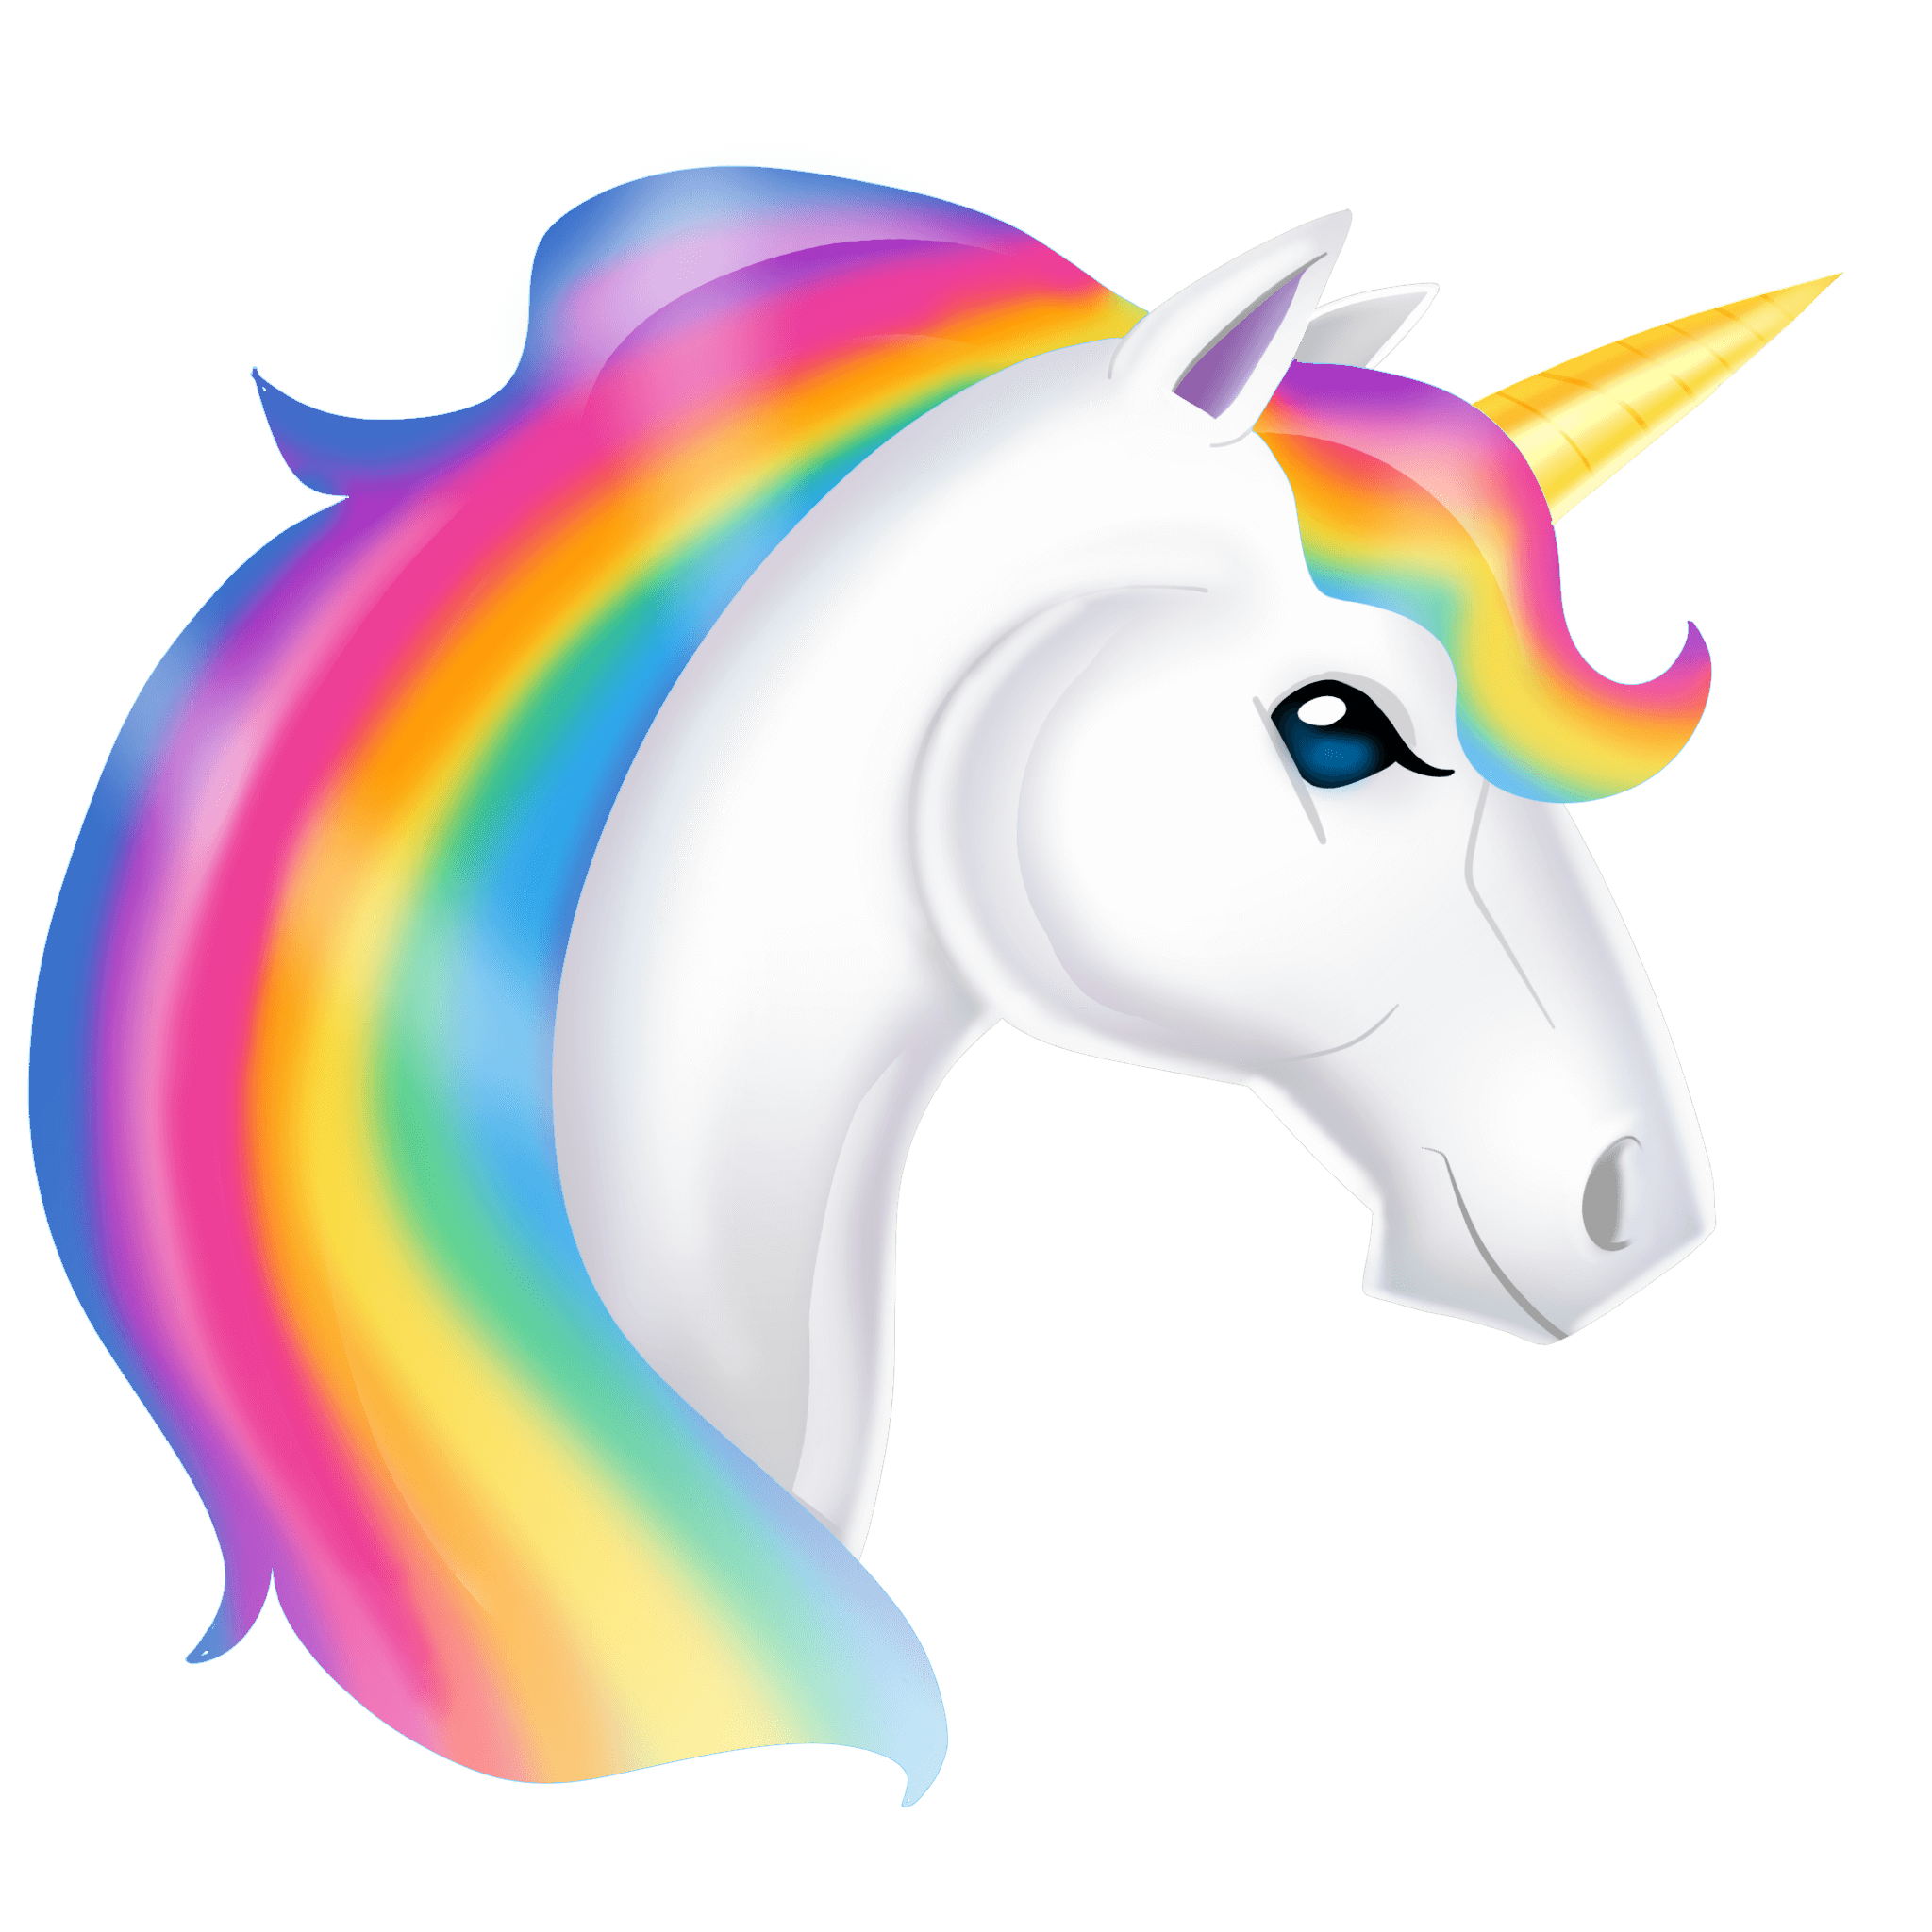 Unicorn Png Cute Unicorn Unicorn Horn Unicorn Face Clipart Free Download Free Transparent Png Logos